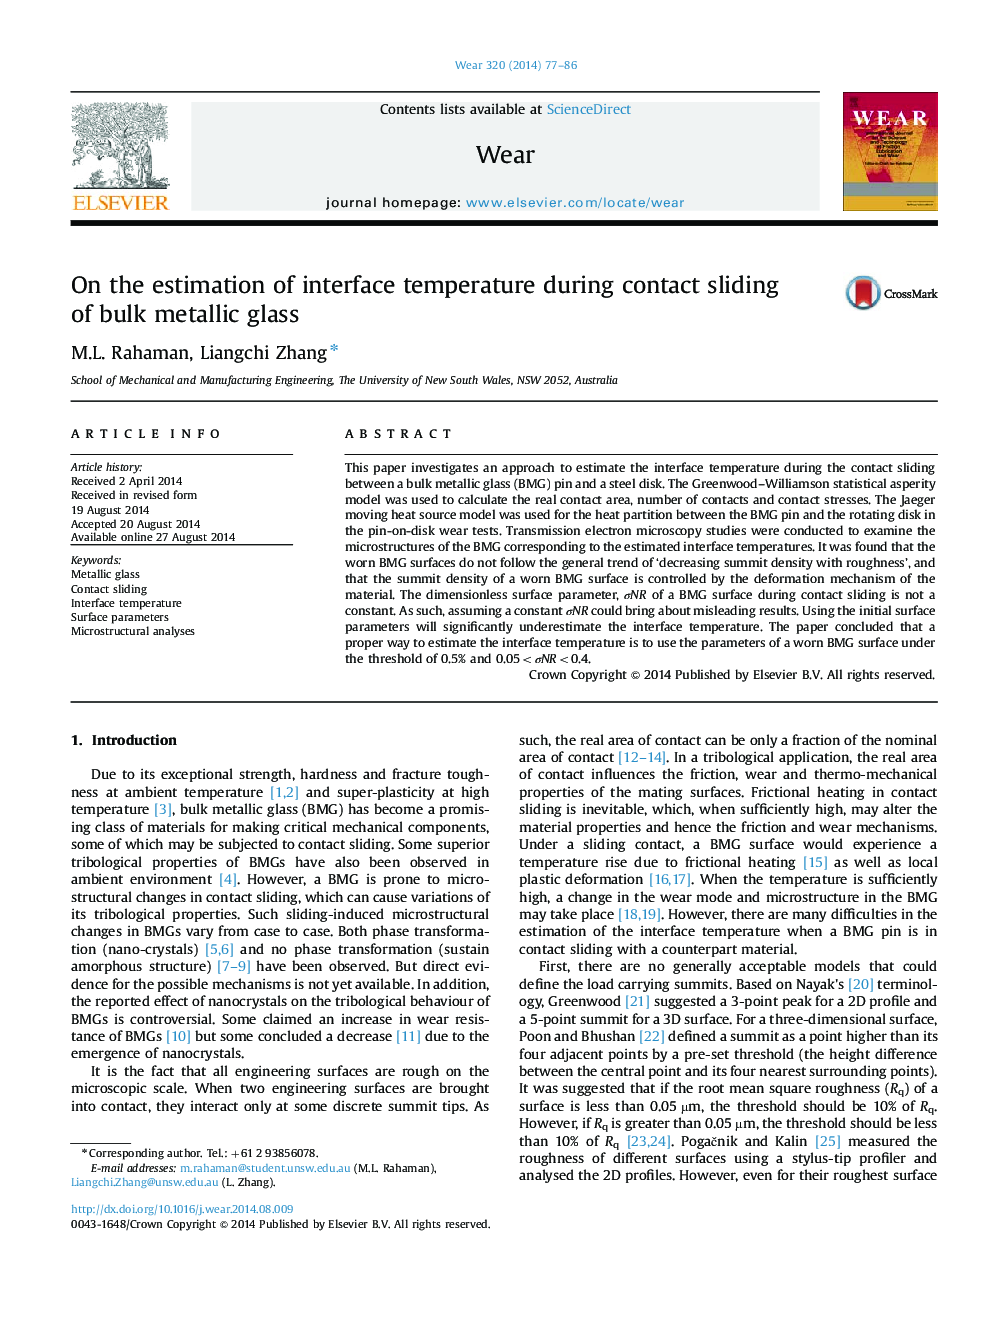 On the estimation of interface temperature during contact sliding of bulk metallic glass